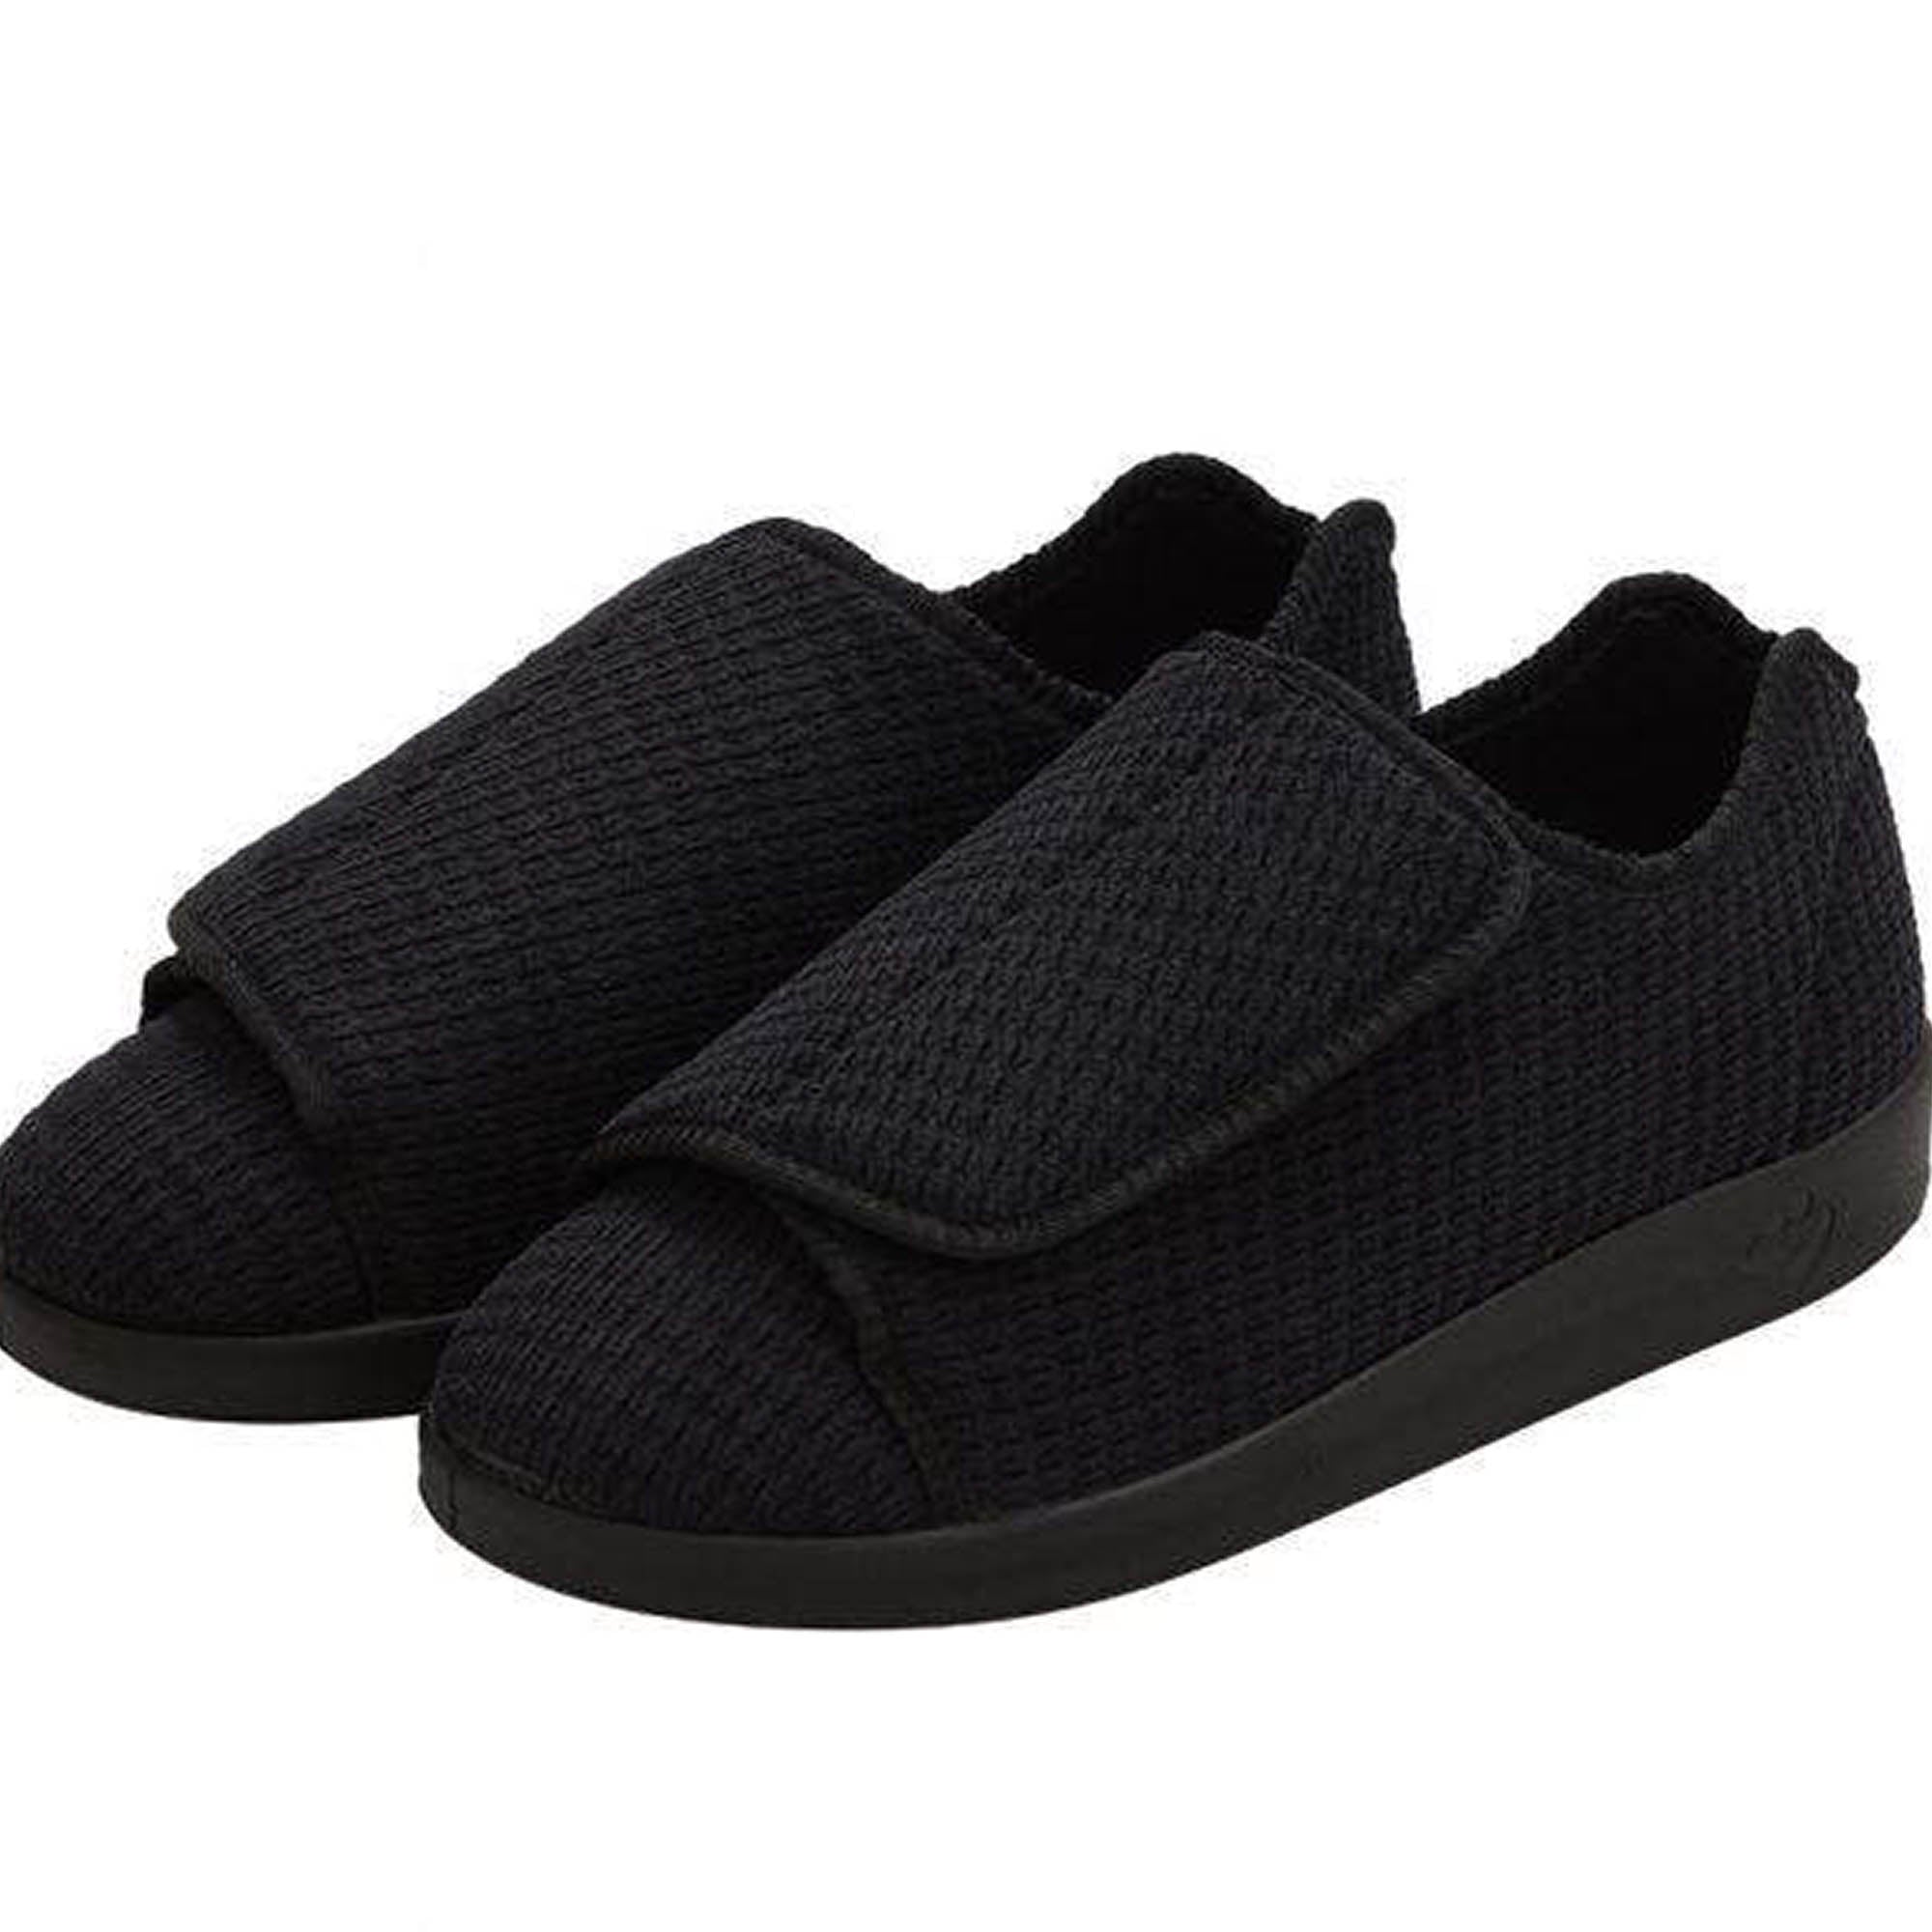 Silverts Men's Extra Extra Wide Slip-Resistant Slippers - Black - 9